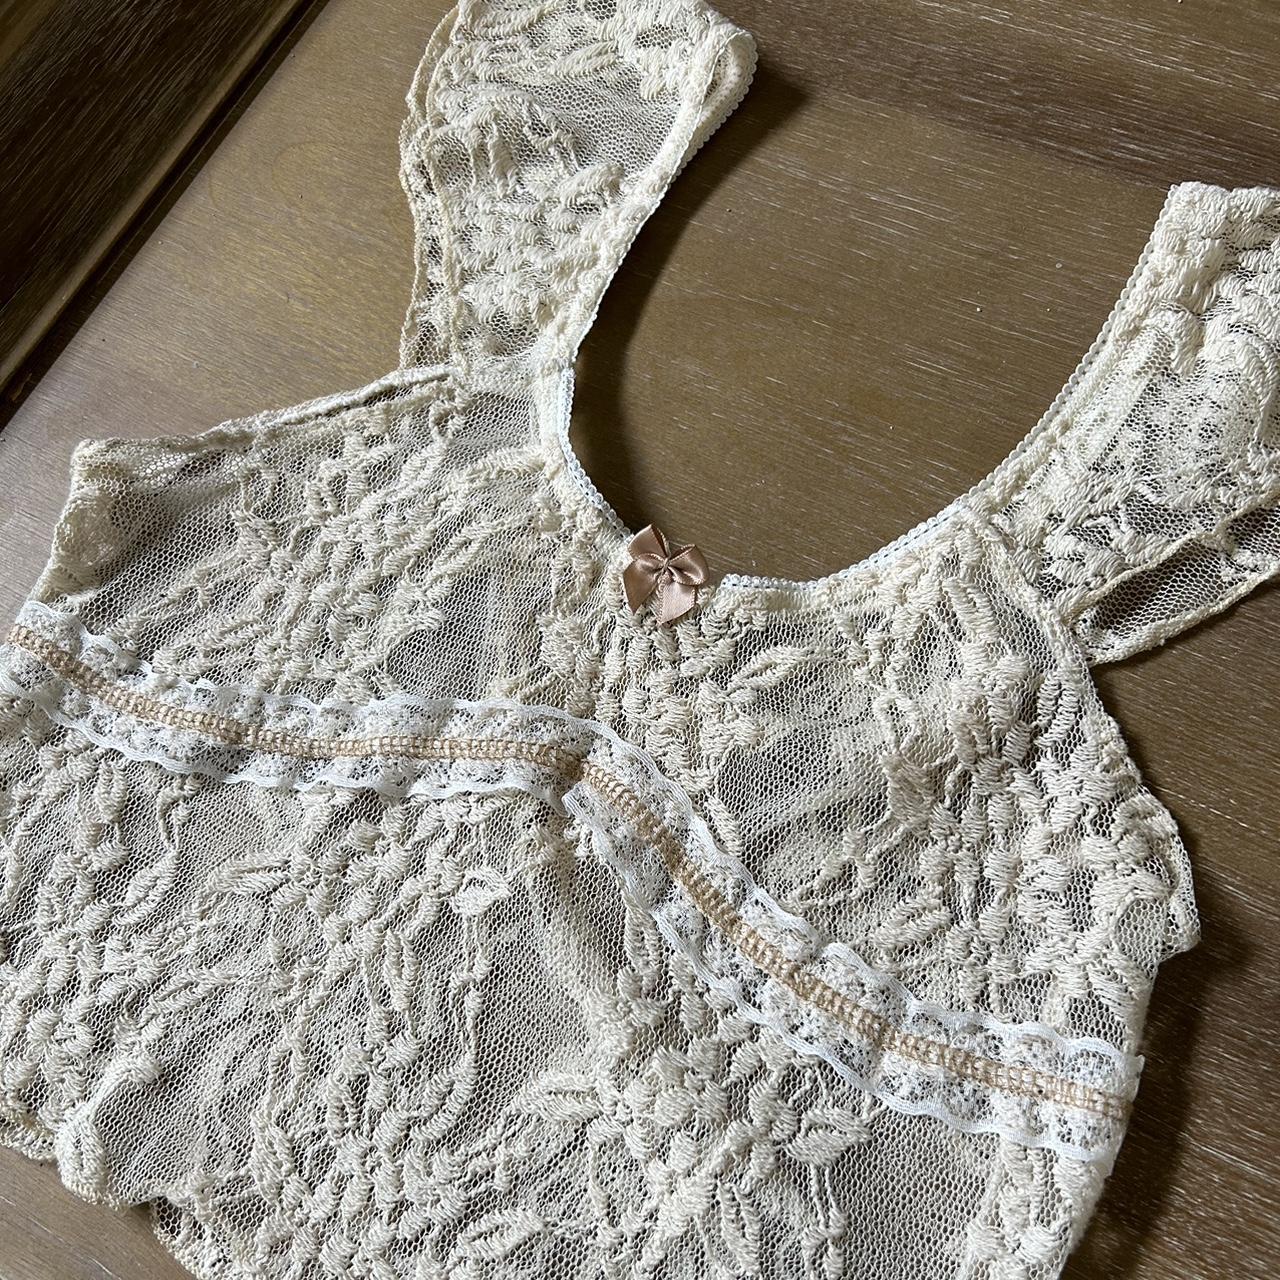 lace sheer top! - size: No tag, fits like a small or... - Depop